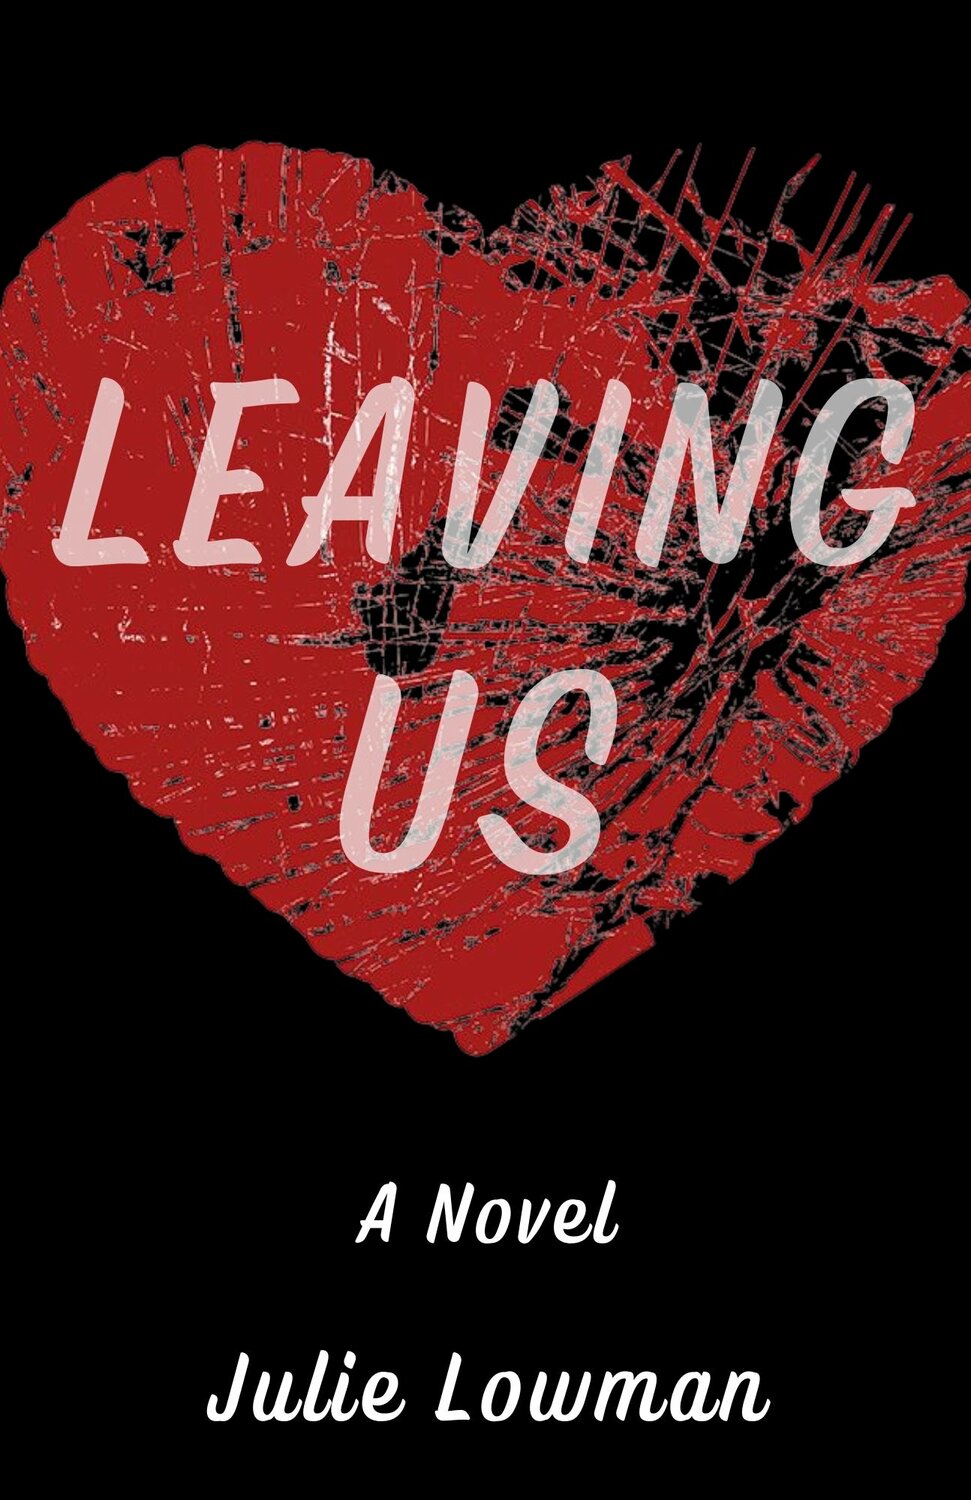 “Leaving Us” is Julie Lowman’s first novel, and it’s available for purchase at booksellers.